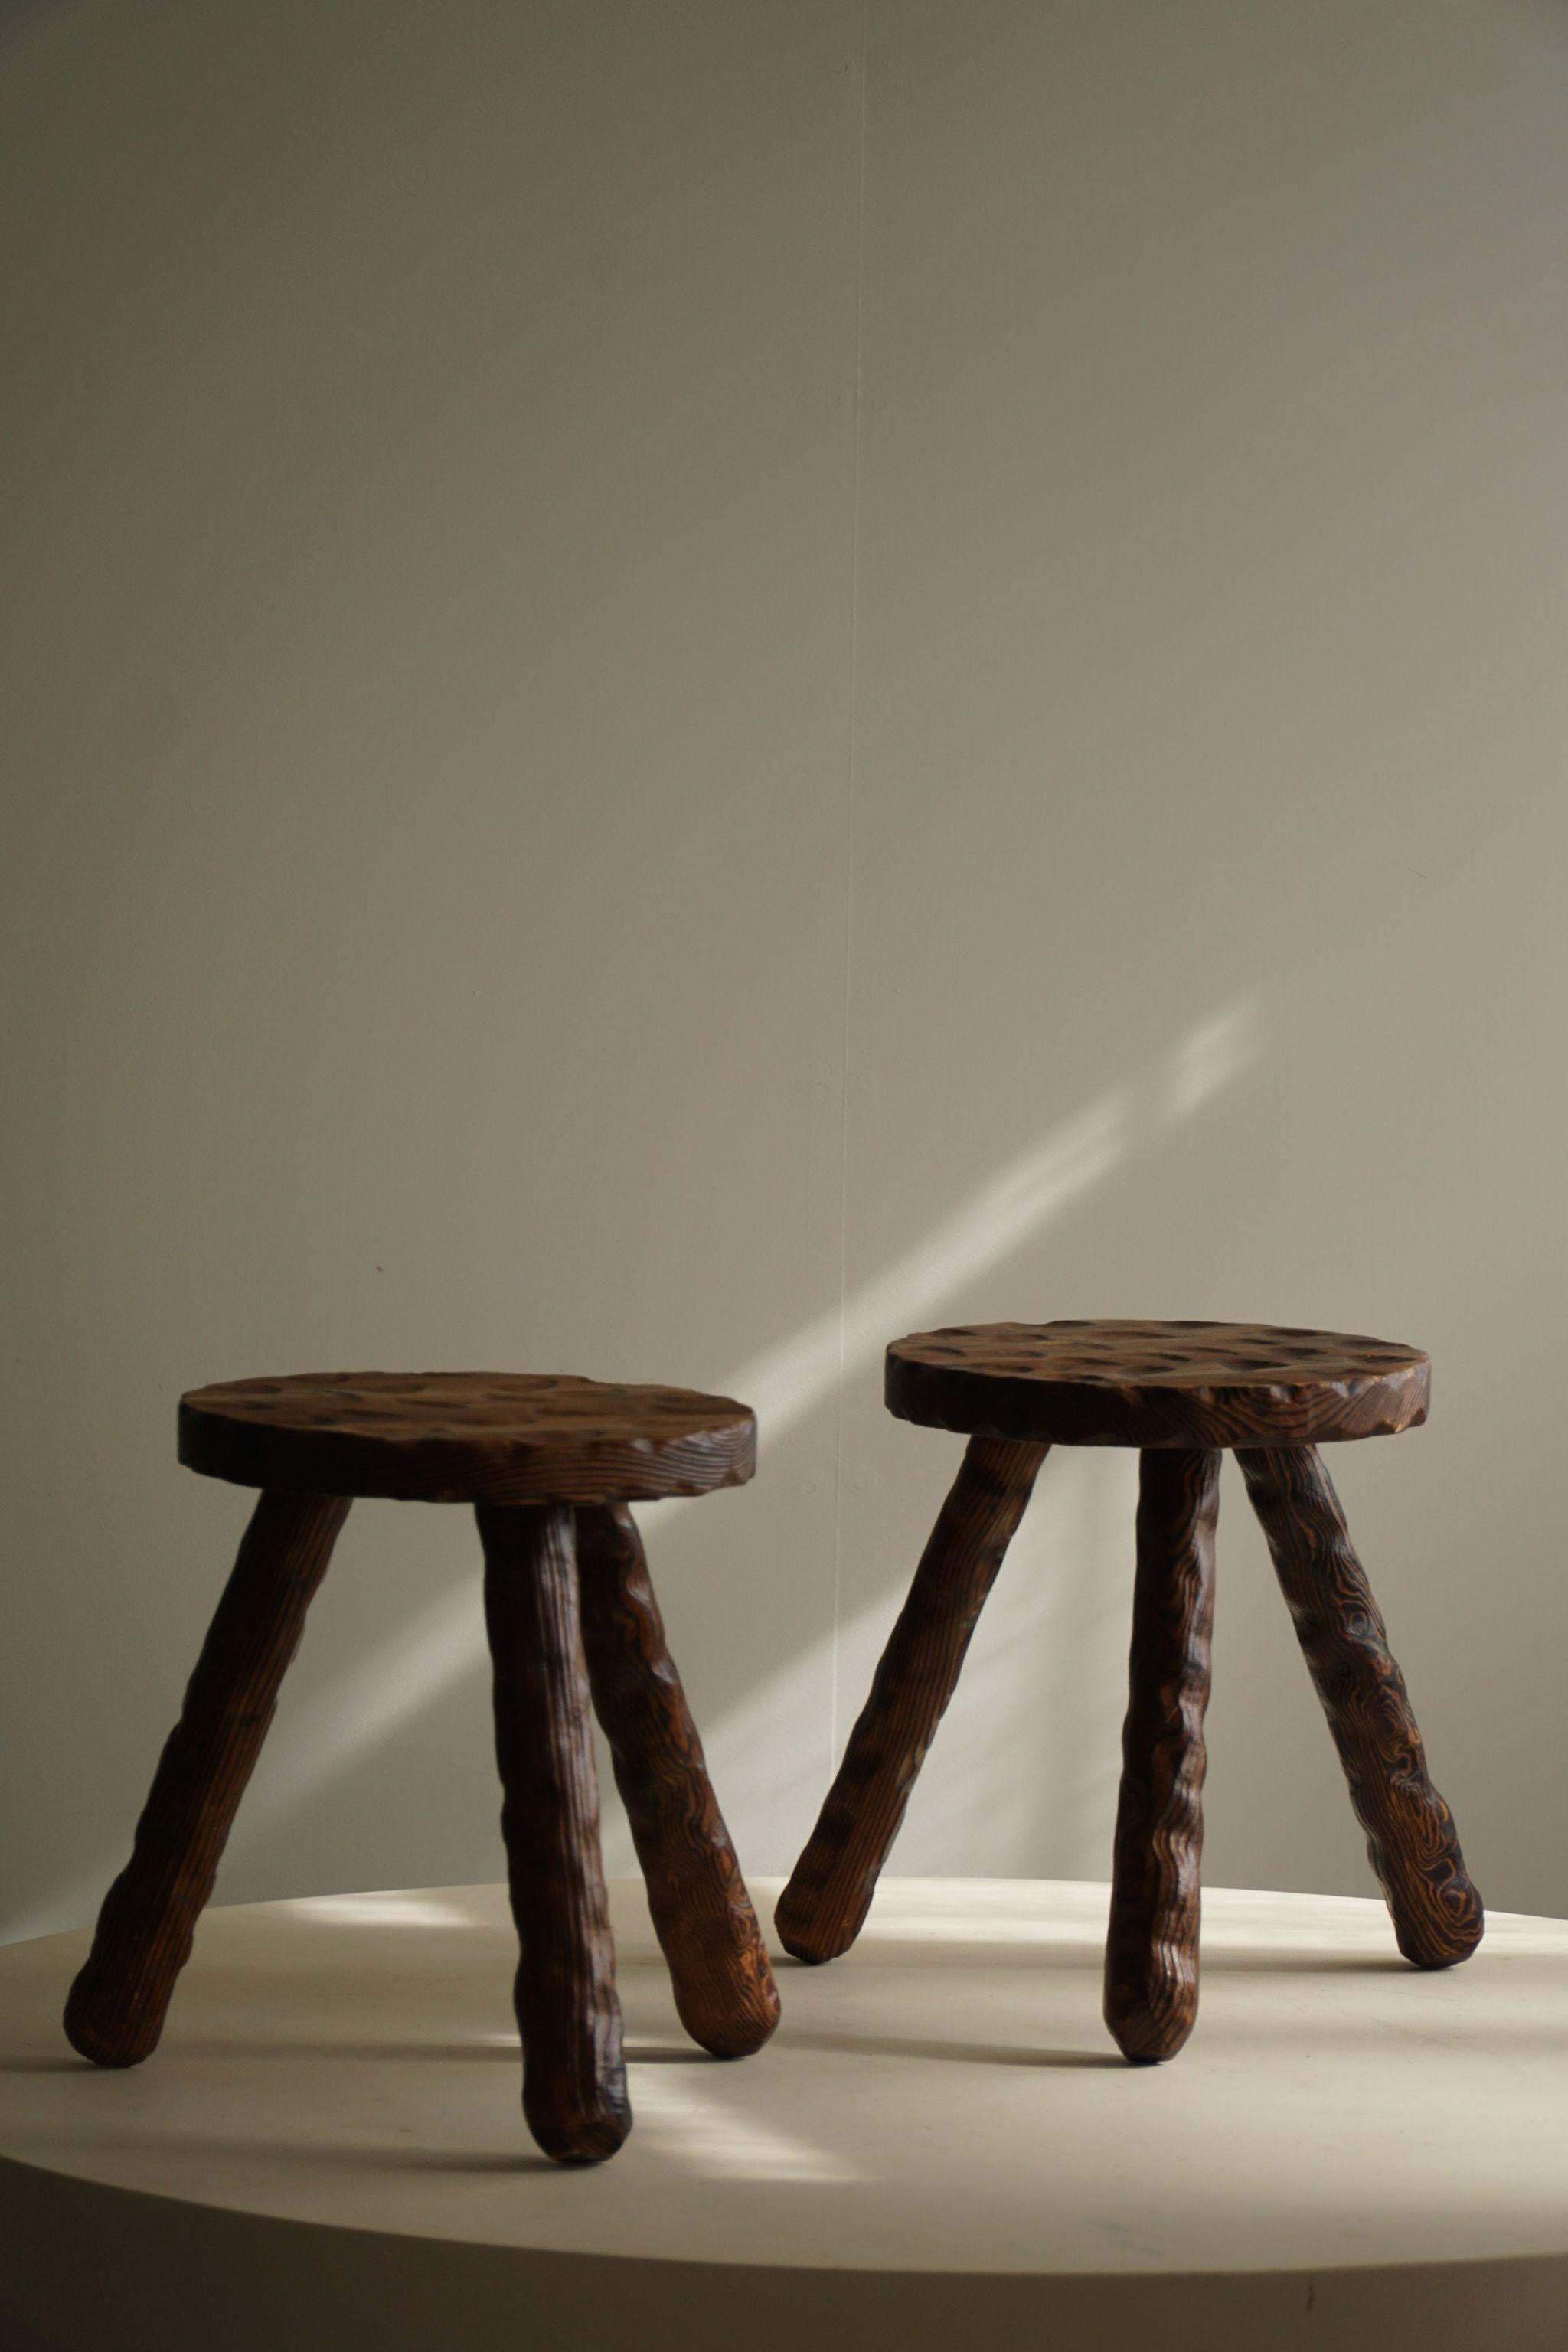 A Pair of Carved Wabi Sabi Stools in Pine, Swedish Mid Century Modern, 1960s For Sale 10